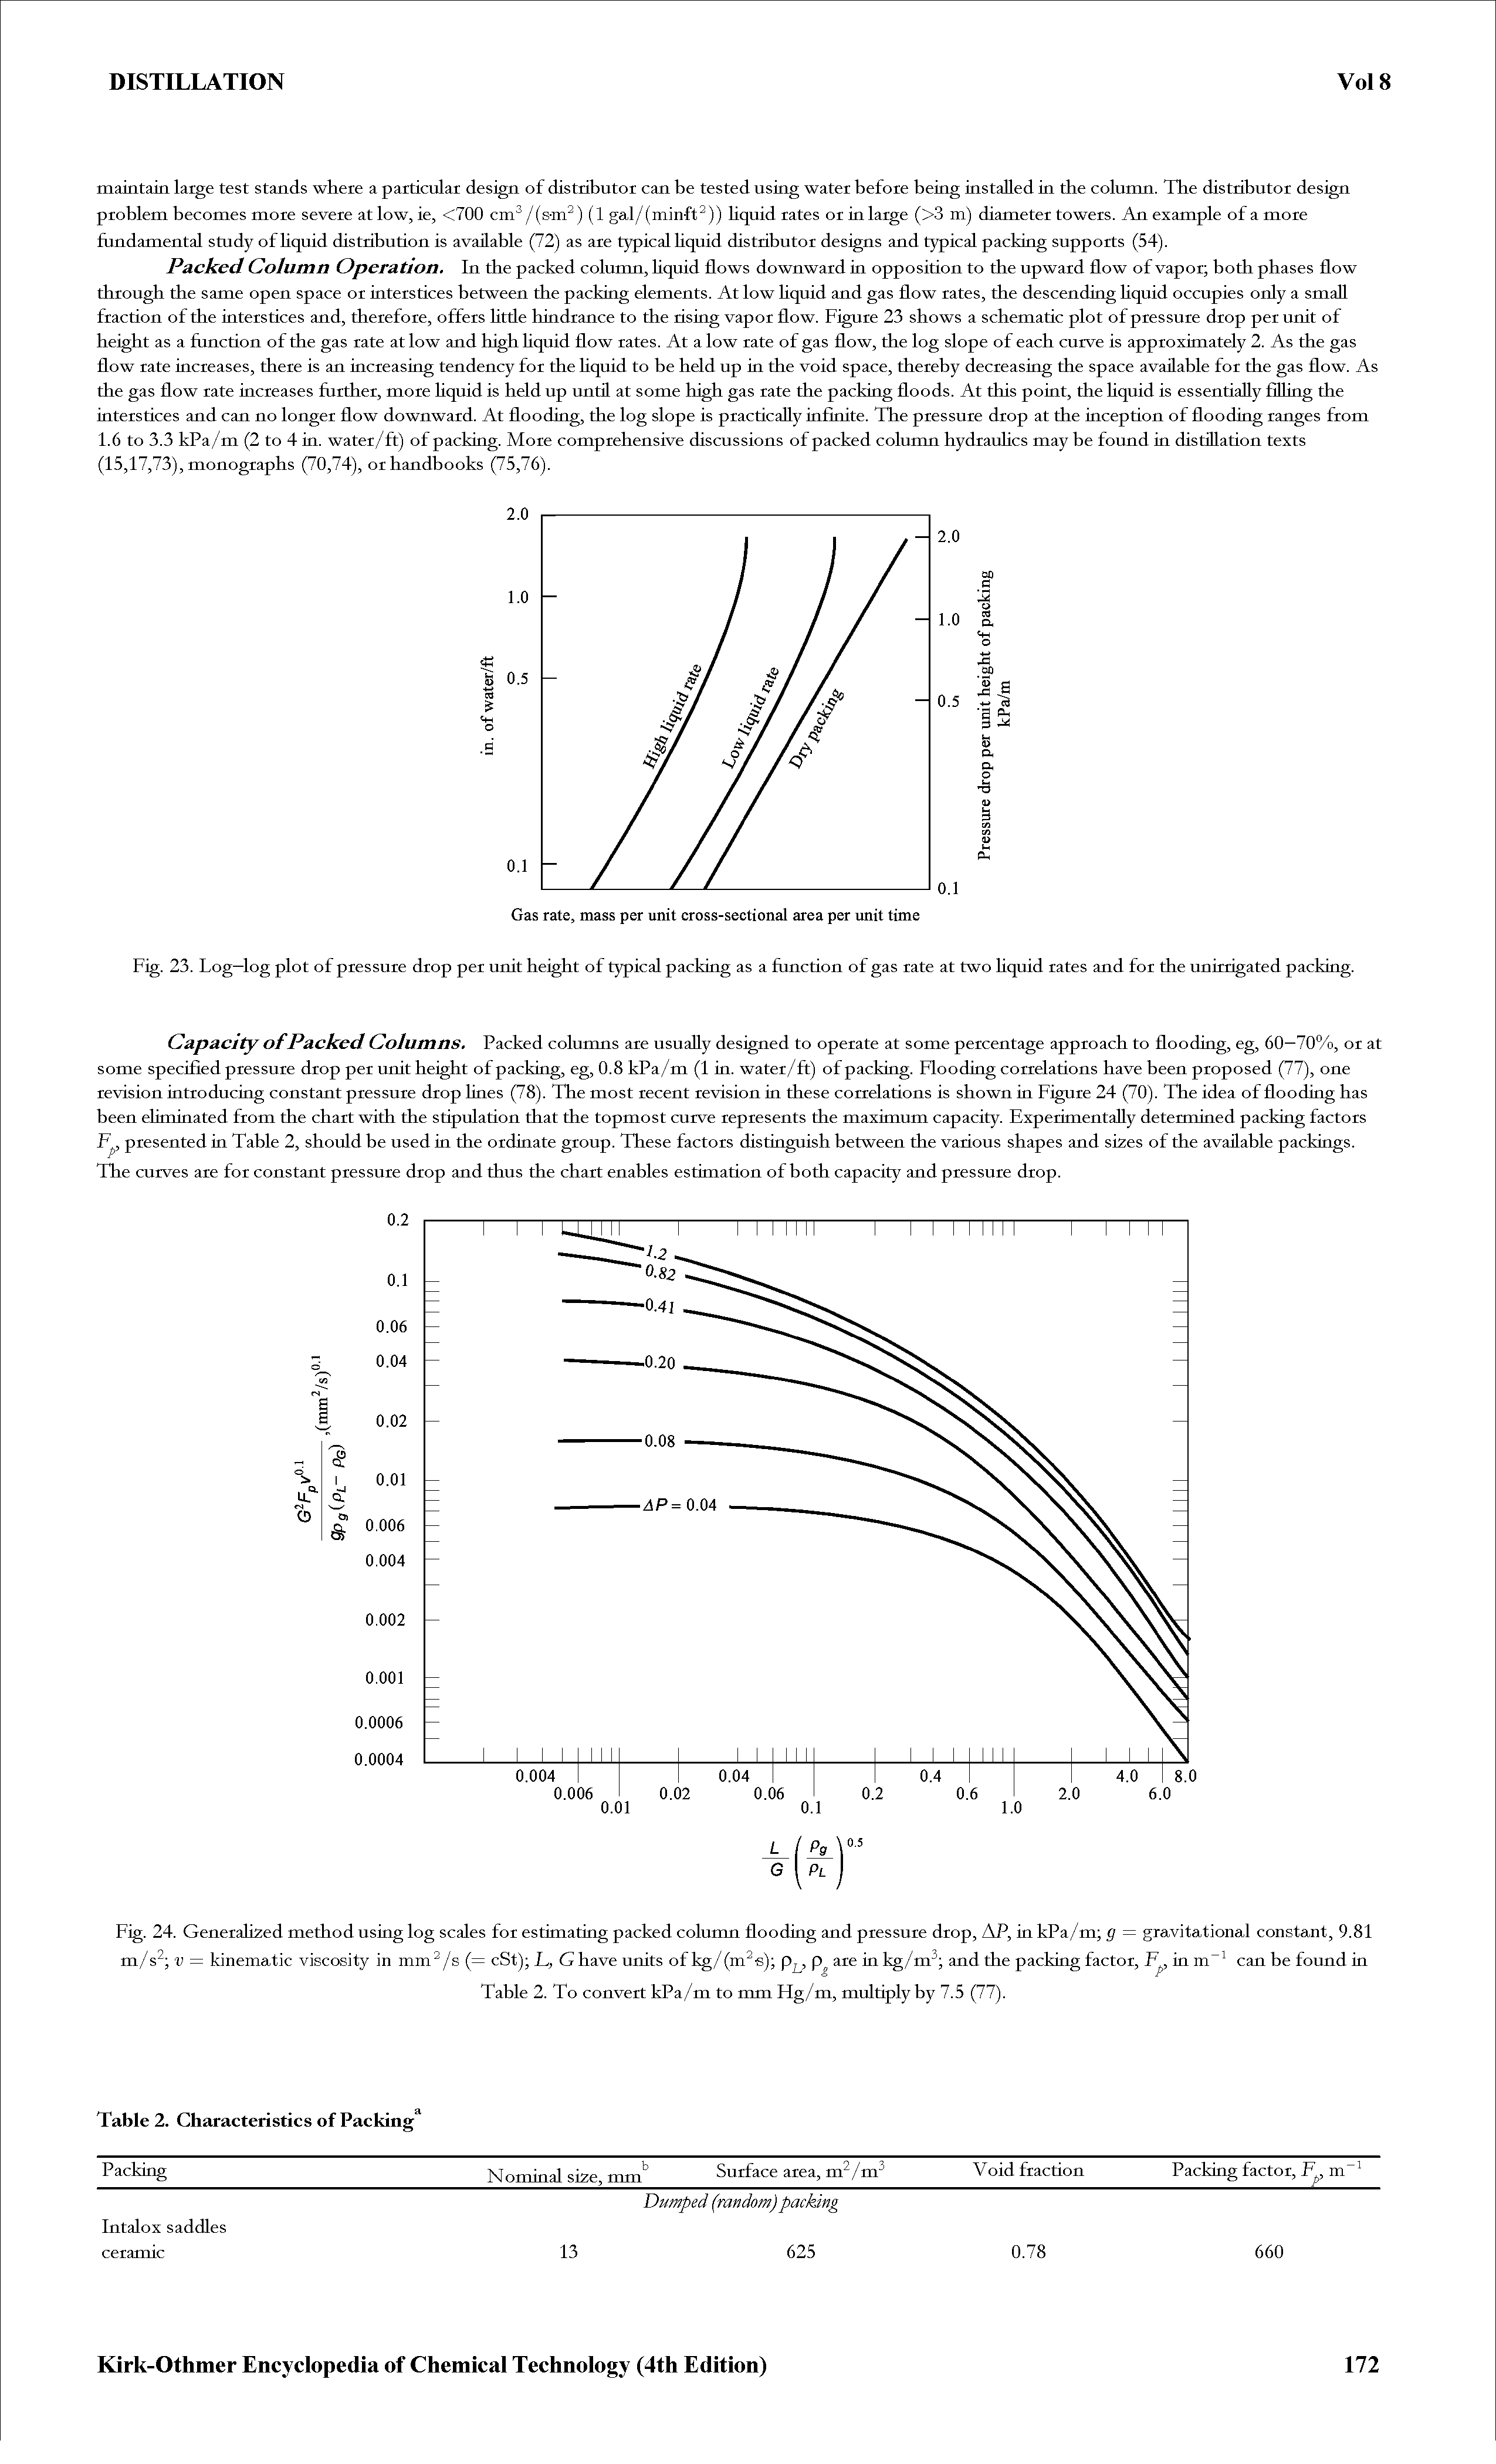 Fig. 24. Generalized method using log scales for estimating packed column flooding and pressure drop, AP, in kPa/m g = gravitational constant, 9.81 m/s t = kinematic viscosity in mm /s (= cSt) E, G have units of kg/(m s) are in kg/m and the packing factor, F, in can be found in...